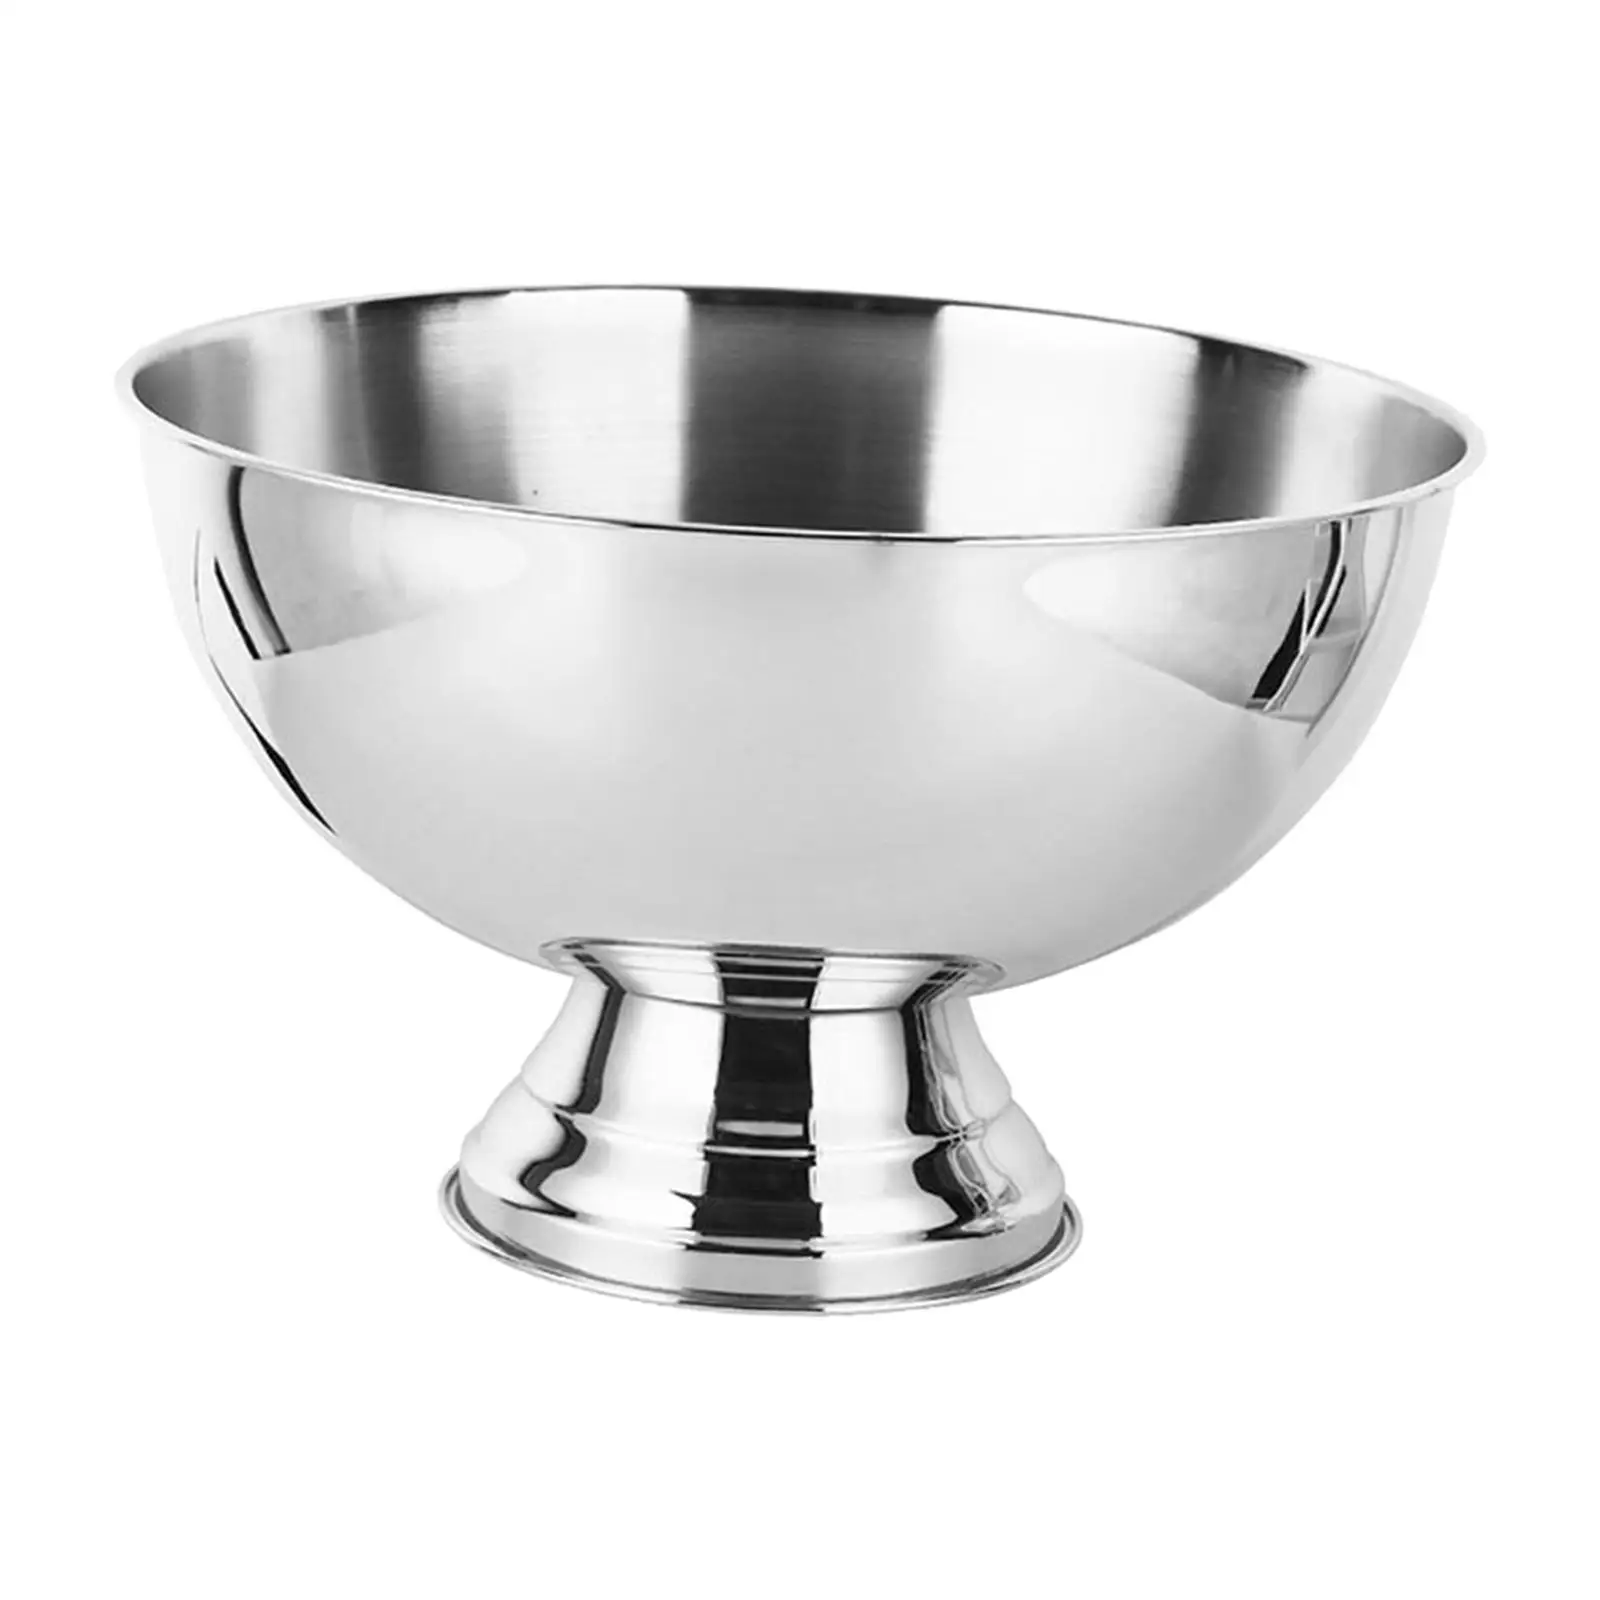 Stainless Steel Champagne Bowl Large Capacity Champagne Storage Bucket Ice Bucket for Outdoor Activities Bars Parties Home BBQ